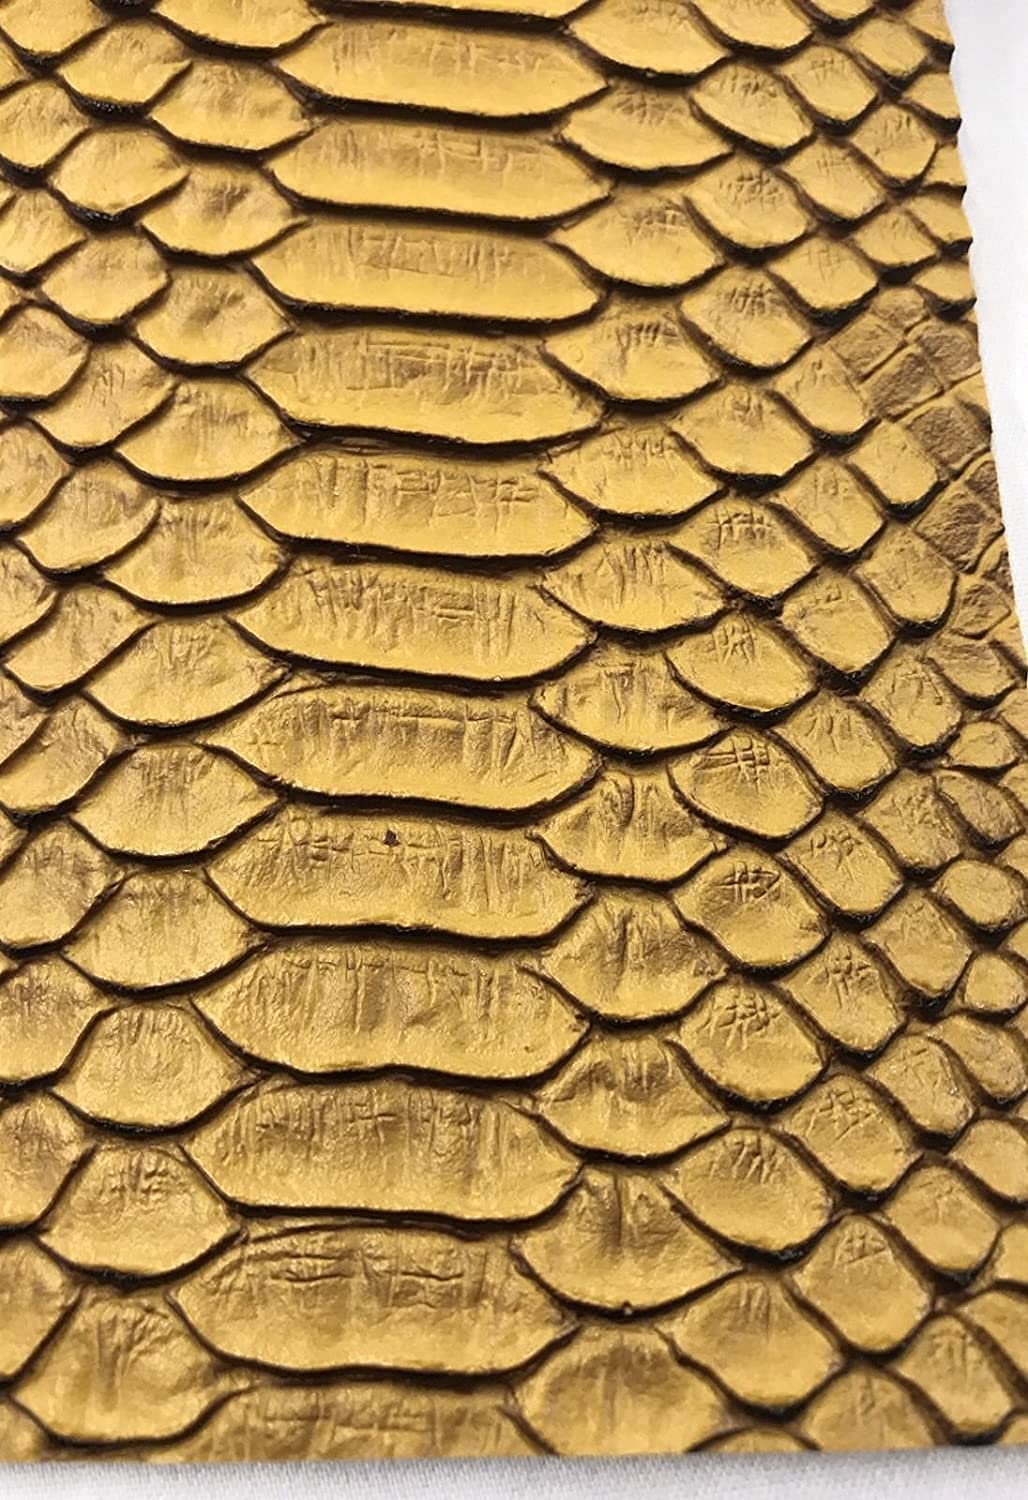 53/54" Wide Snake Fake Leather Upholstery, 3-D Viper Snake Skin Texture Faux Leather PVC Vinyl Fabric by The Yard. (1 Yard, Matt Gold)